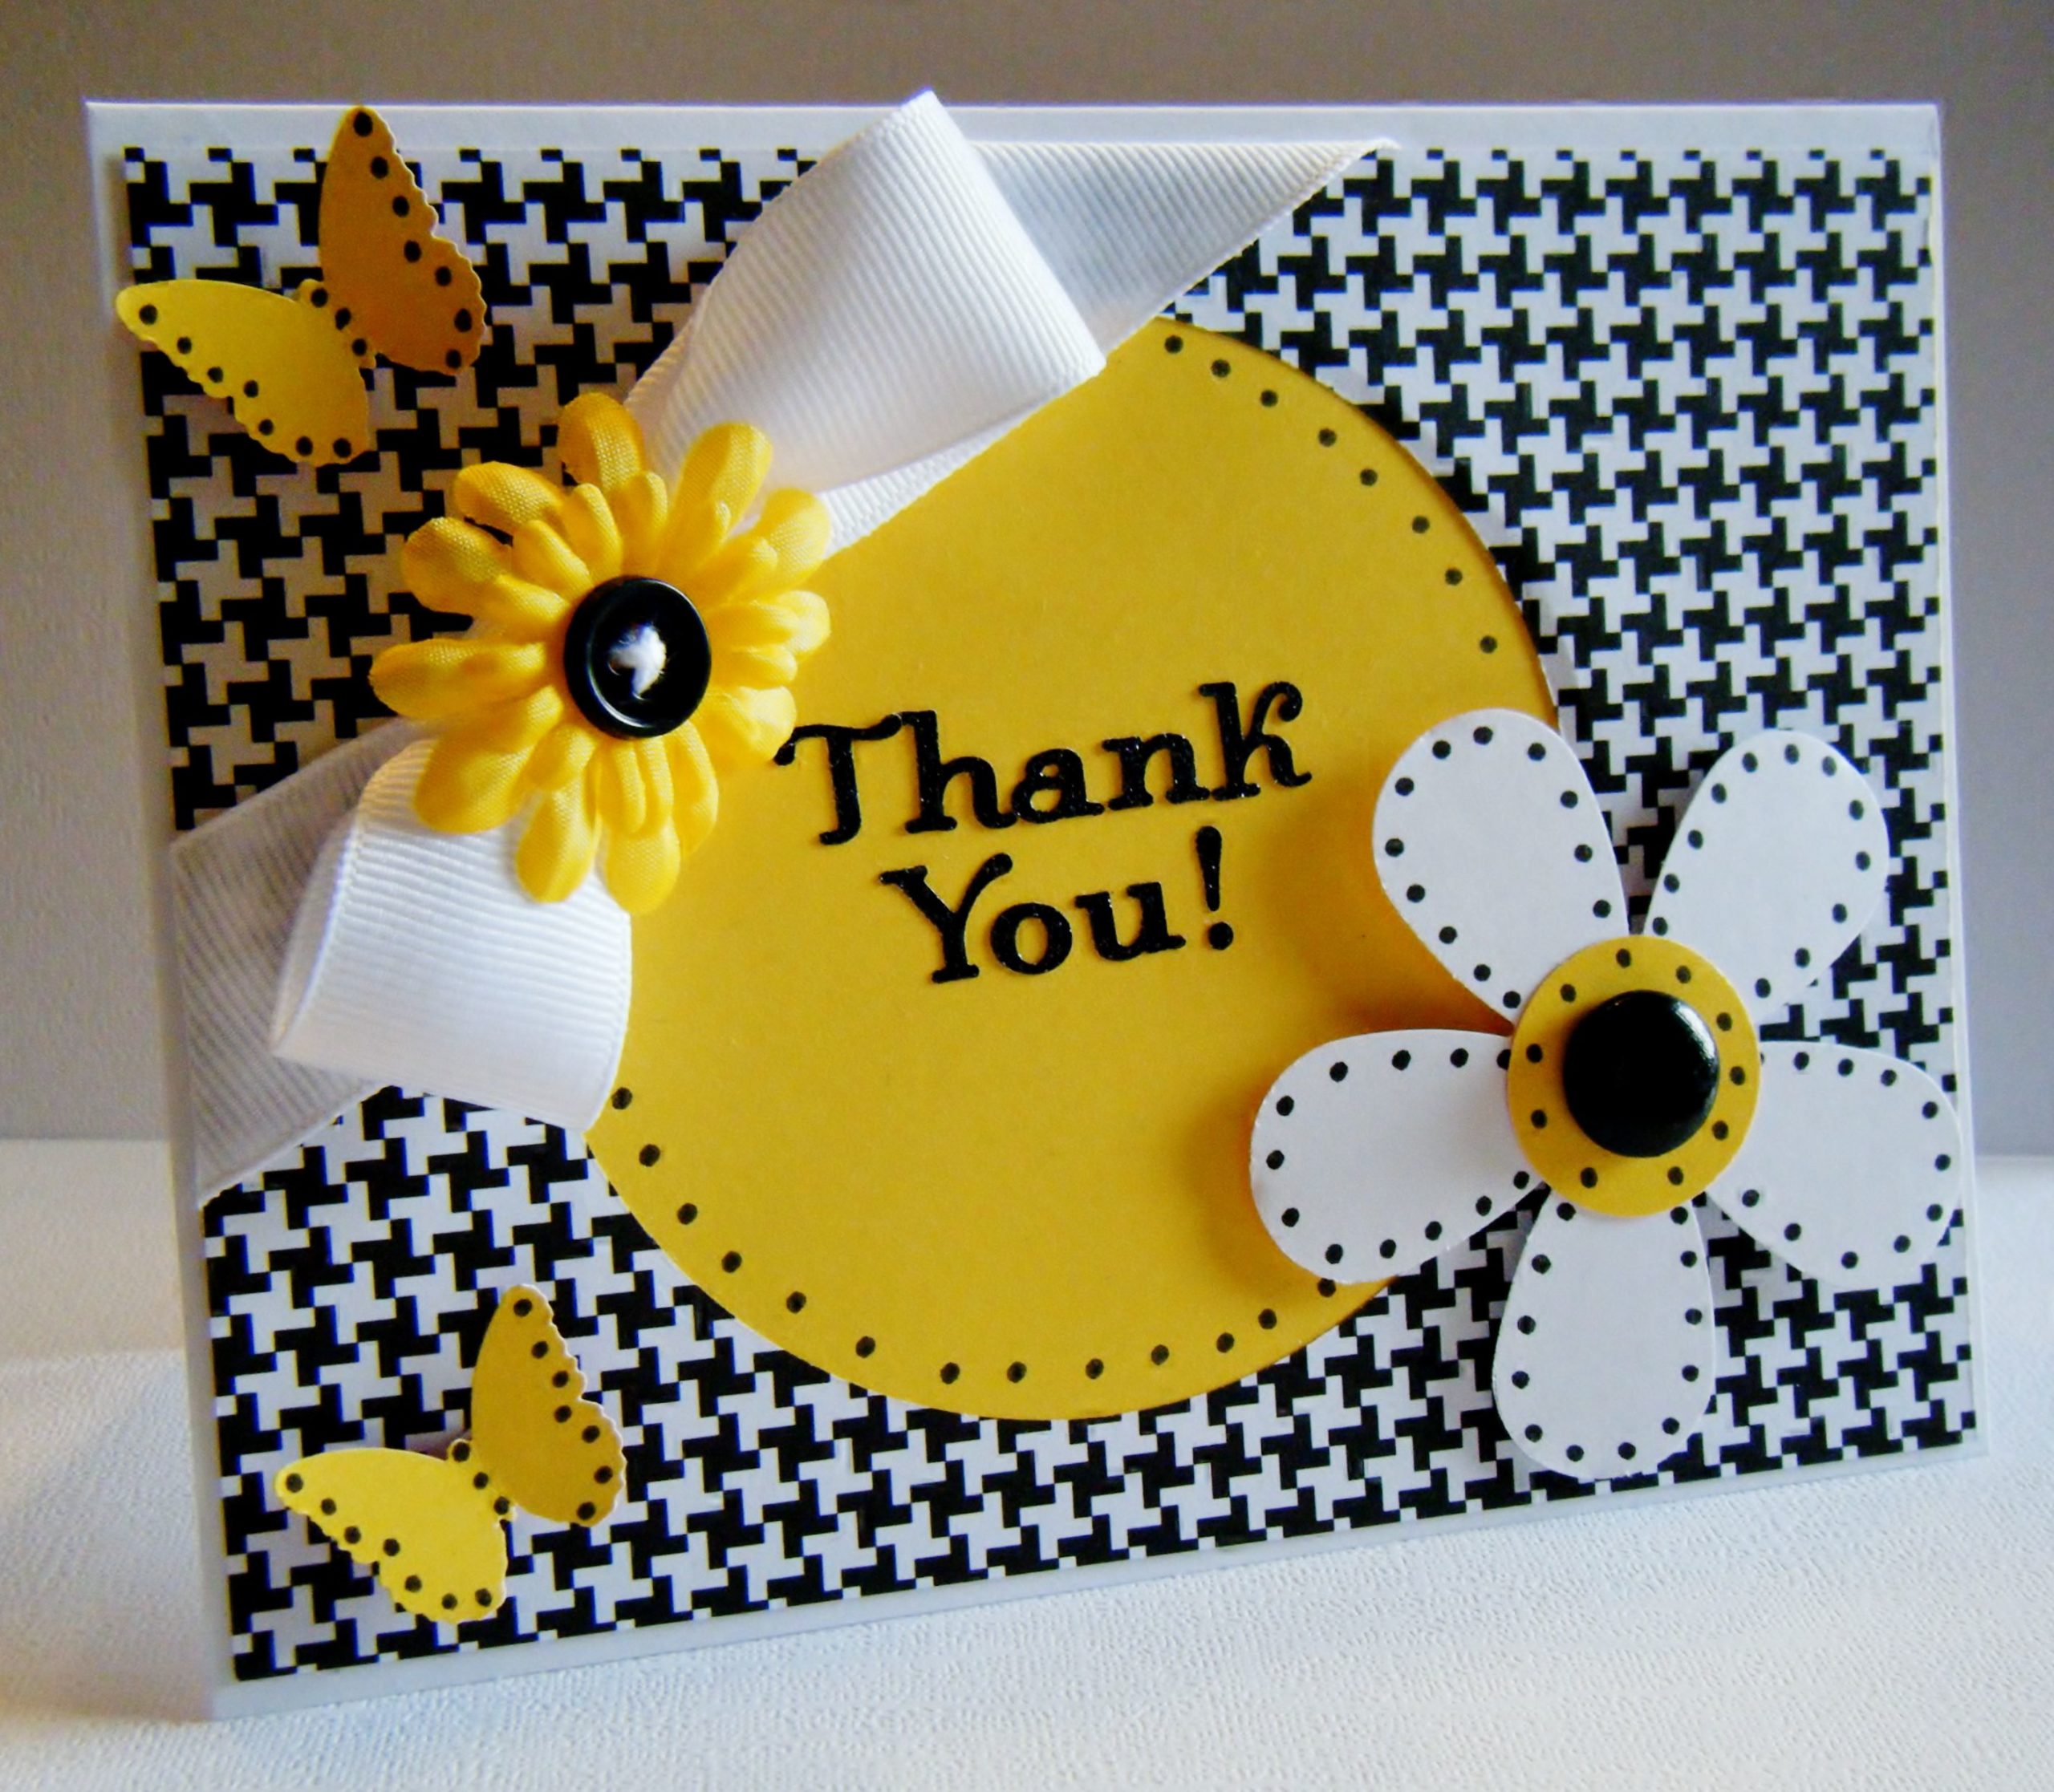 creative thank you cards for business 8